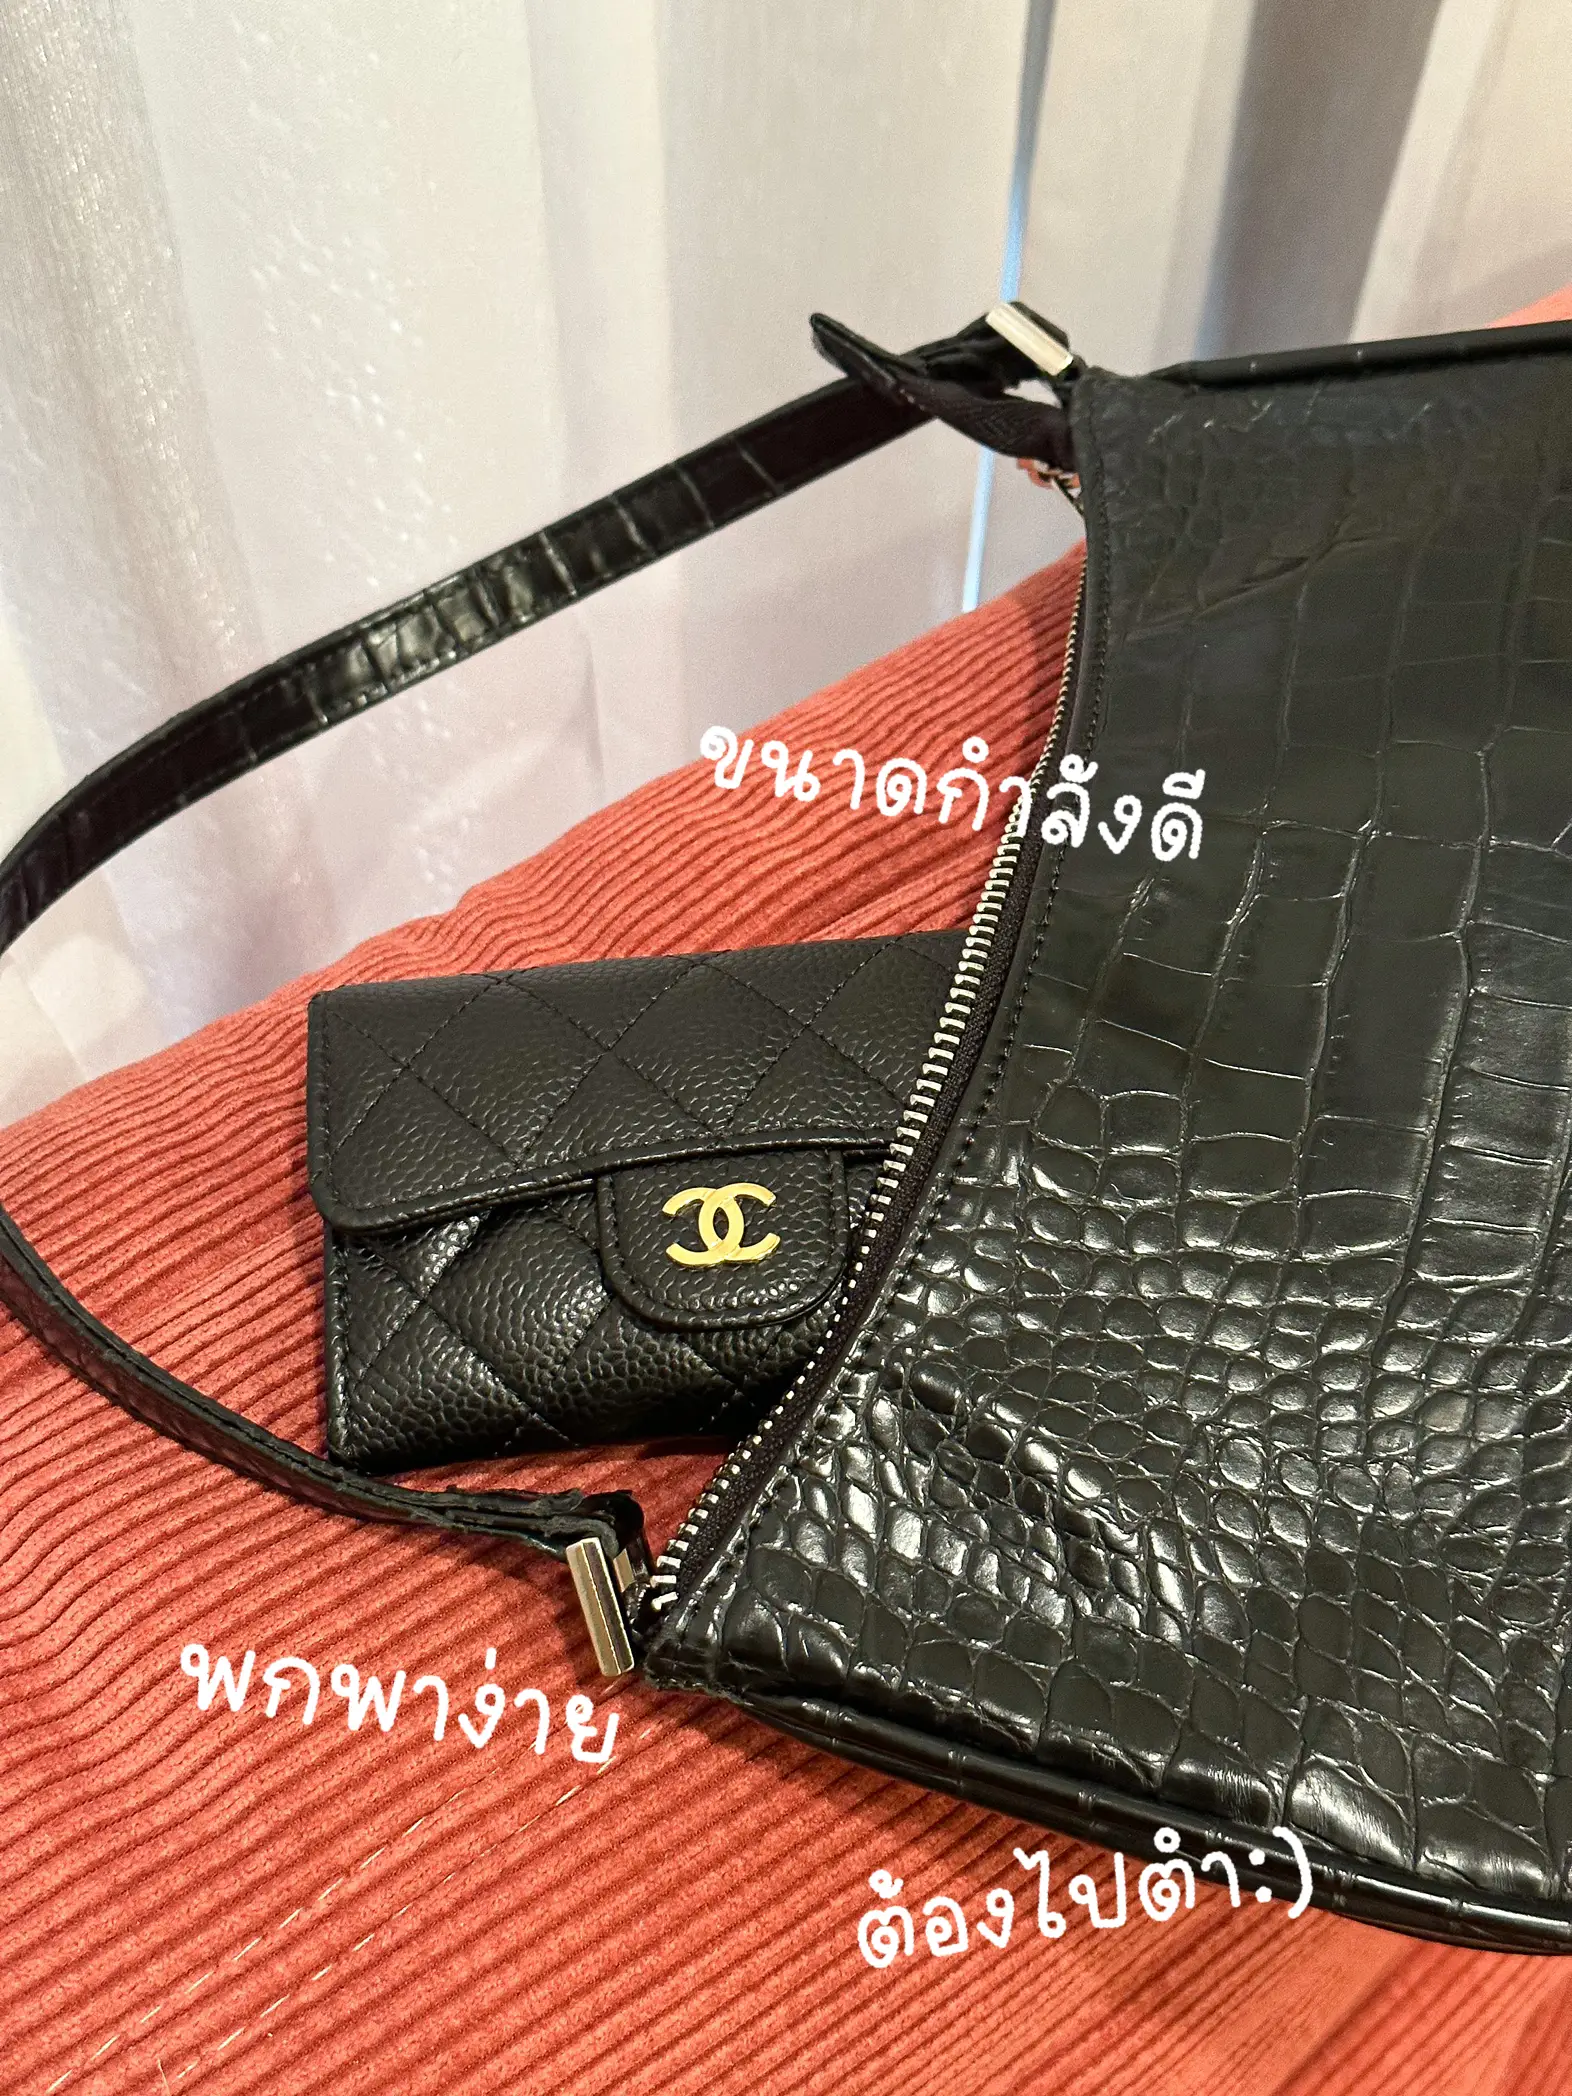 Chanel Card Holder review that should be pounded✨, Gallery posted by  nutchabeam